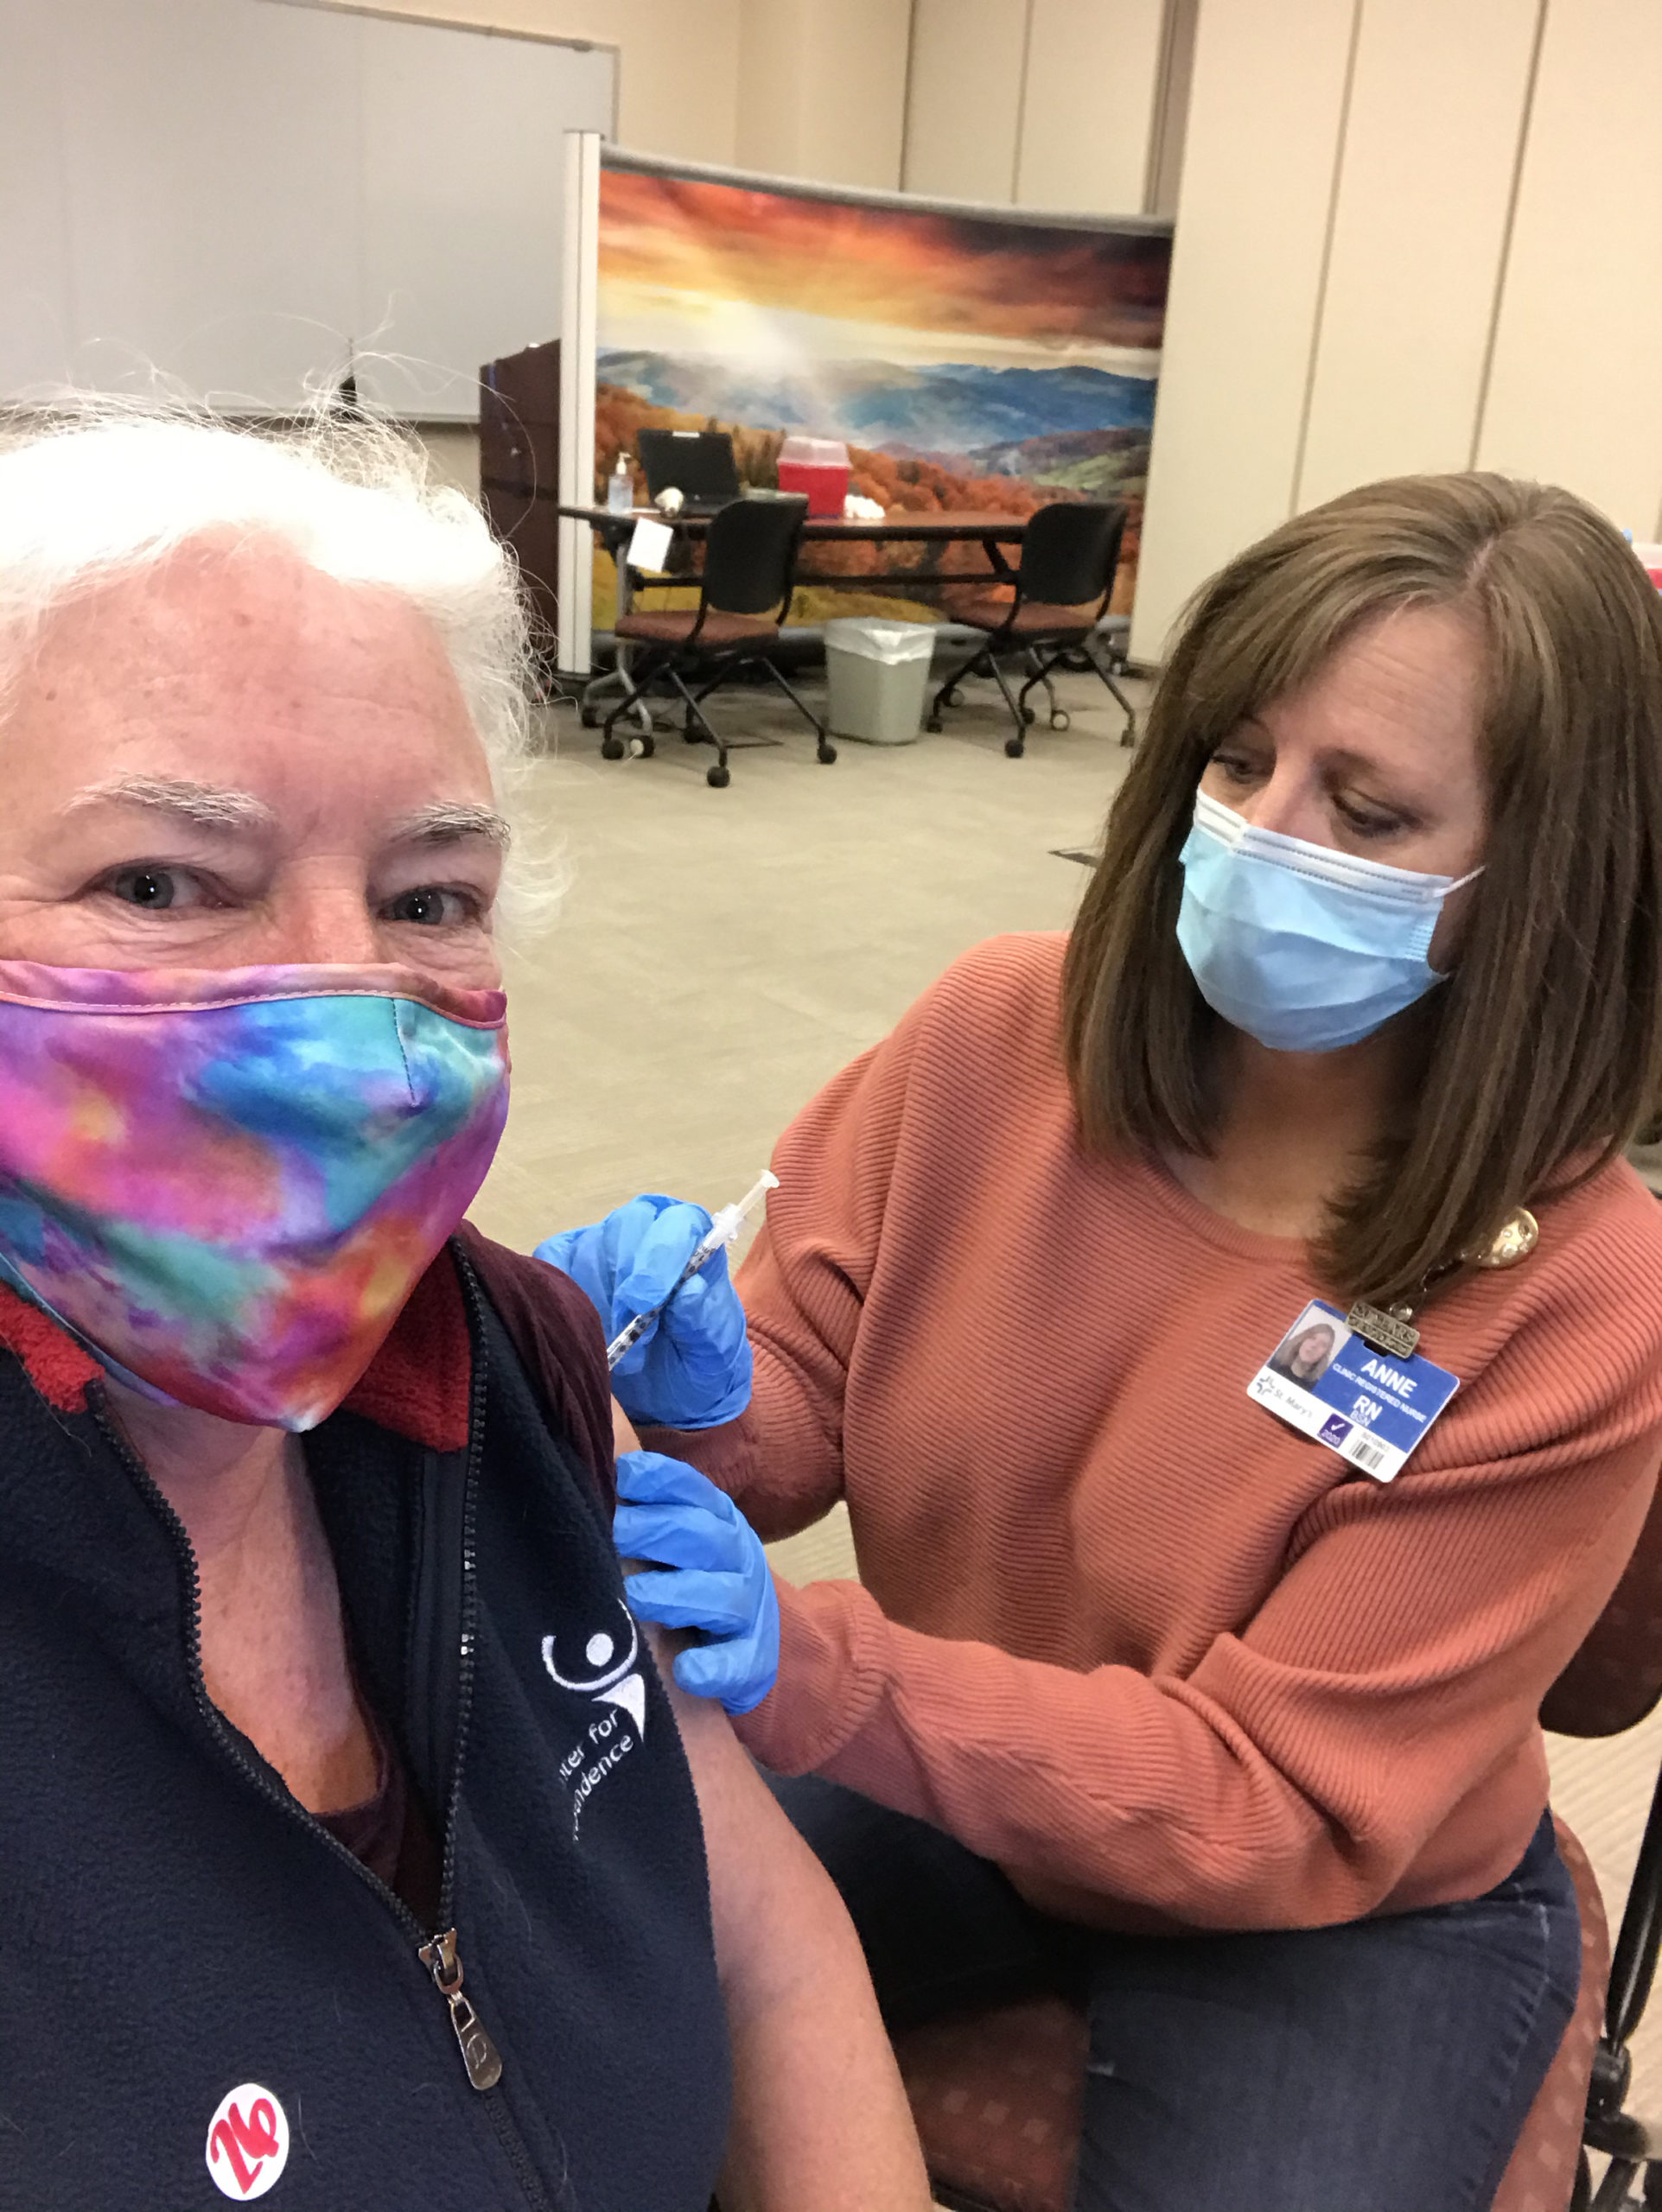 Woman with mask receives a vaccine from a nurse in a mask.